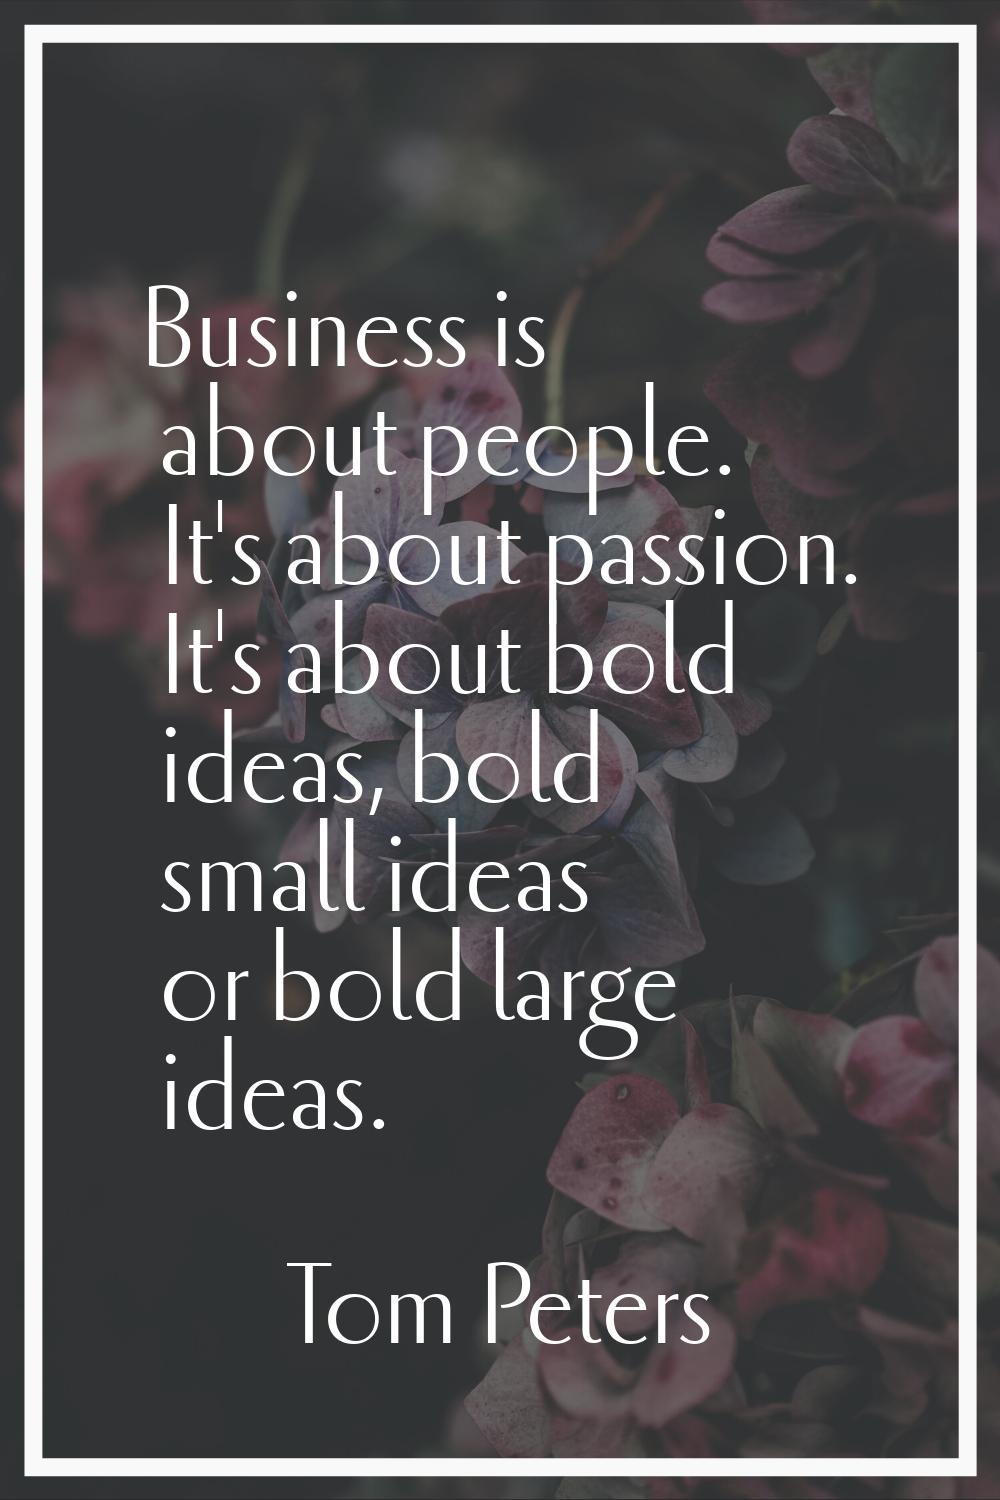 Business is about people. It's about passion. It's about bold ideas, bold small ideas or bold large